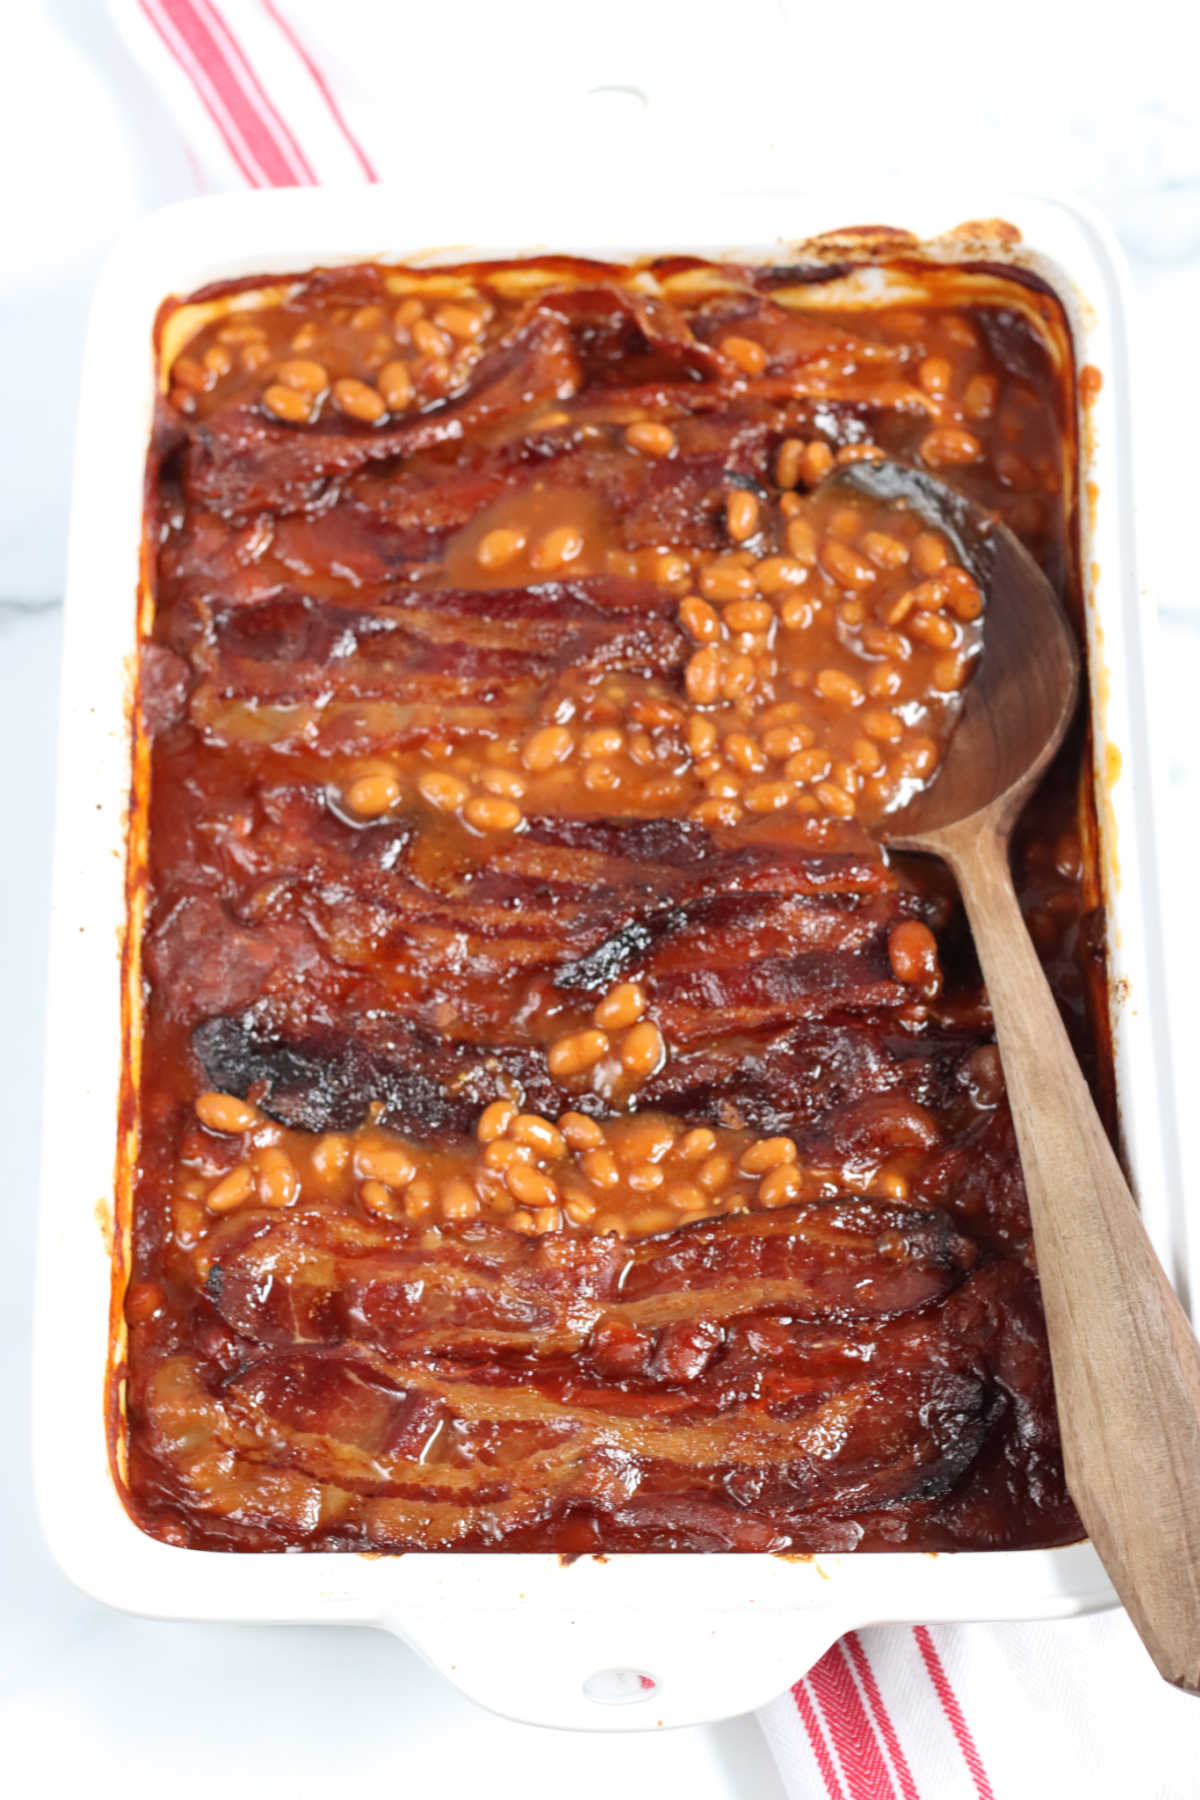 Baked beans topped with crispy bacon in white rectangle baking dish, wooden spoon in right of dish.